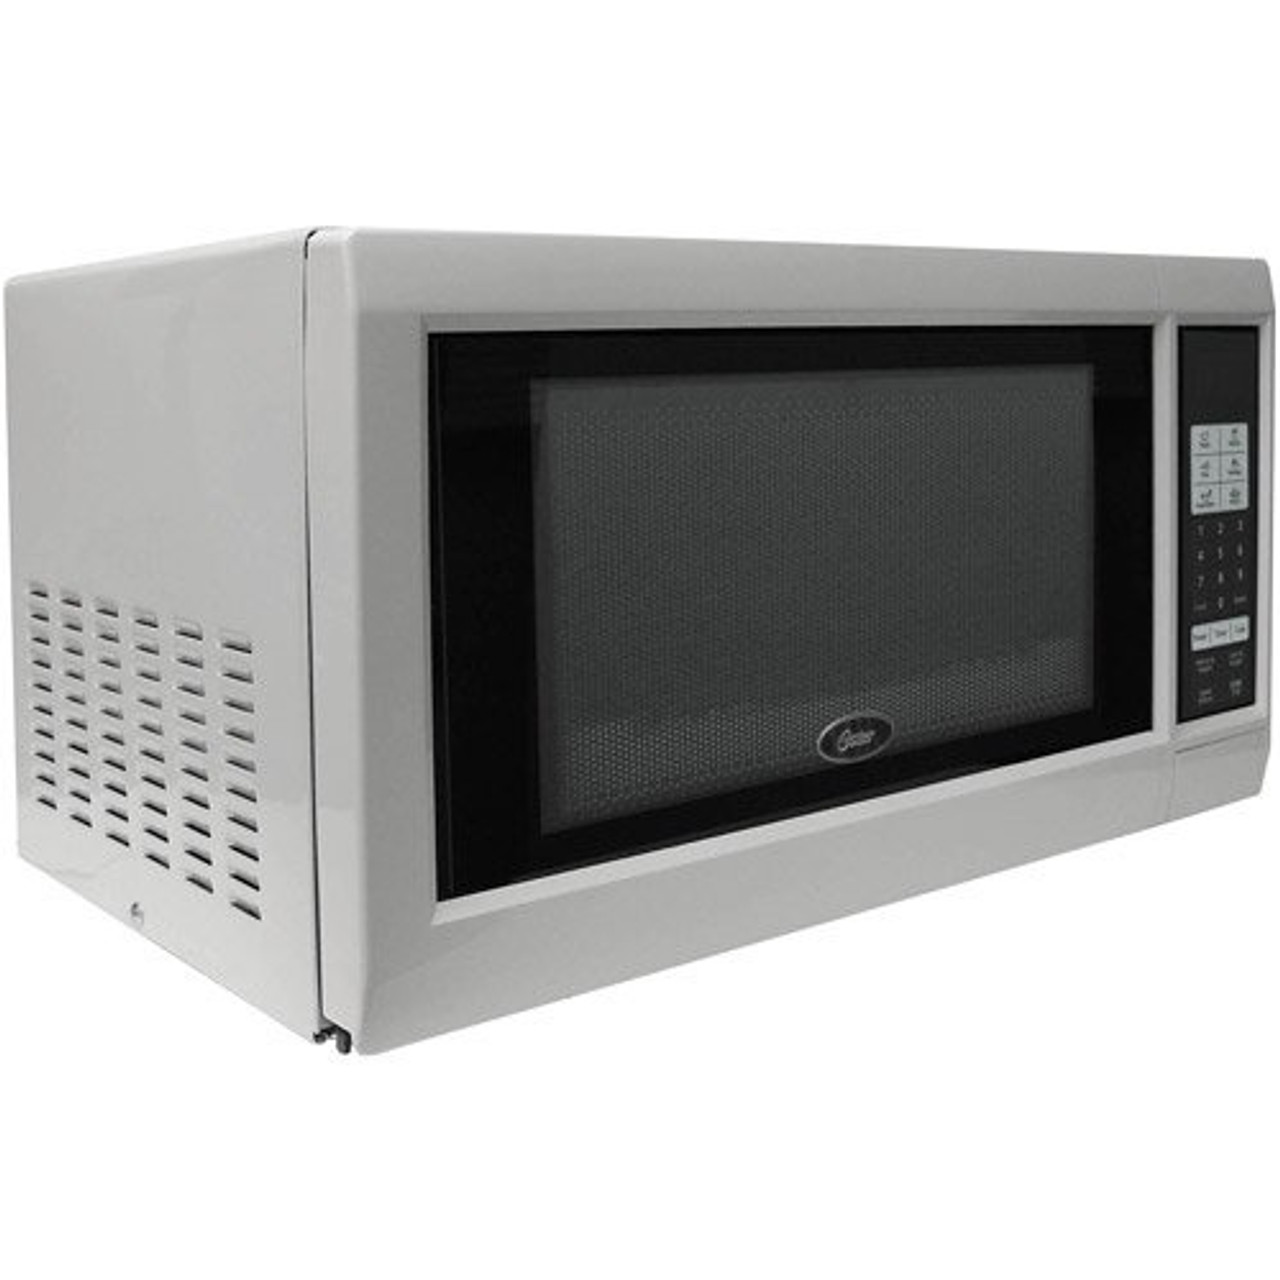 Oster 0.9 Cu. Ft. Digital Microwave Oven, Atg Archive